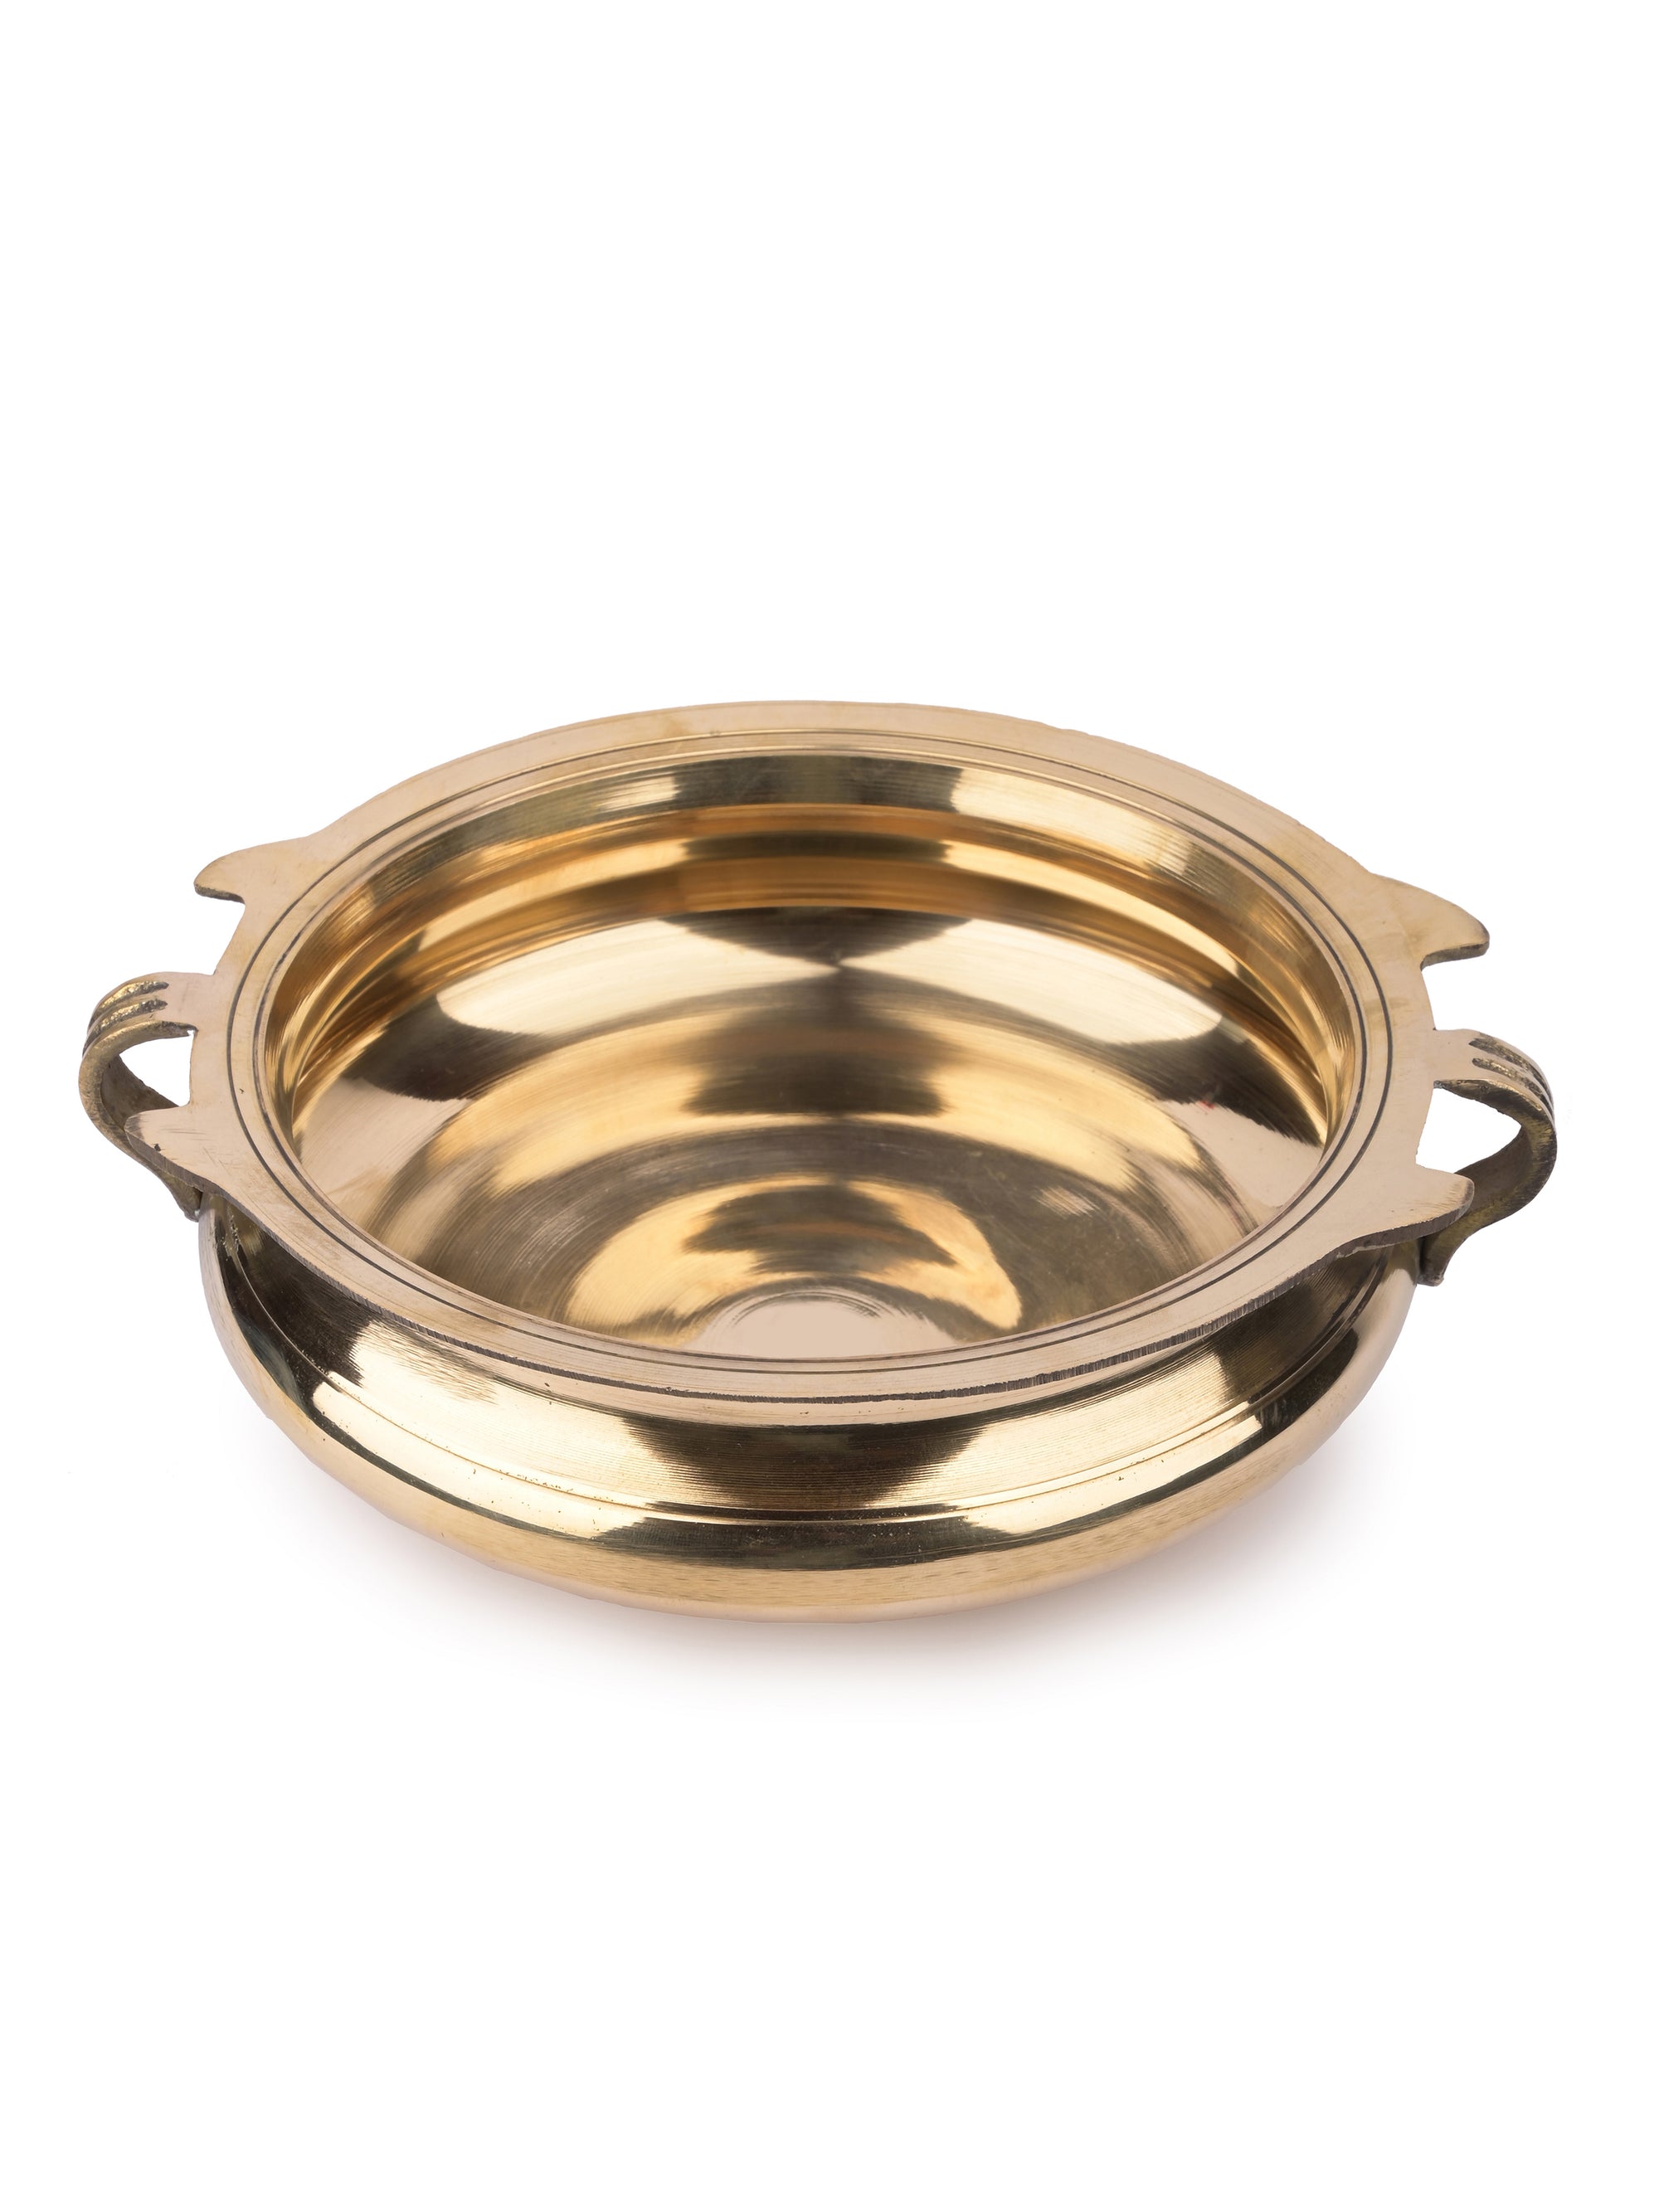 Traditional Brass Urli / Bowl for Home Decoration - 9 inches diameter - The Heritage Artifacts